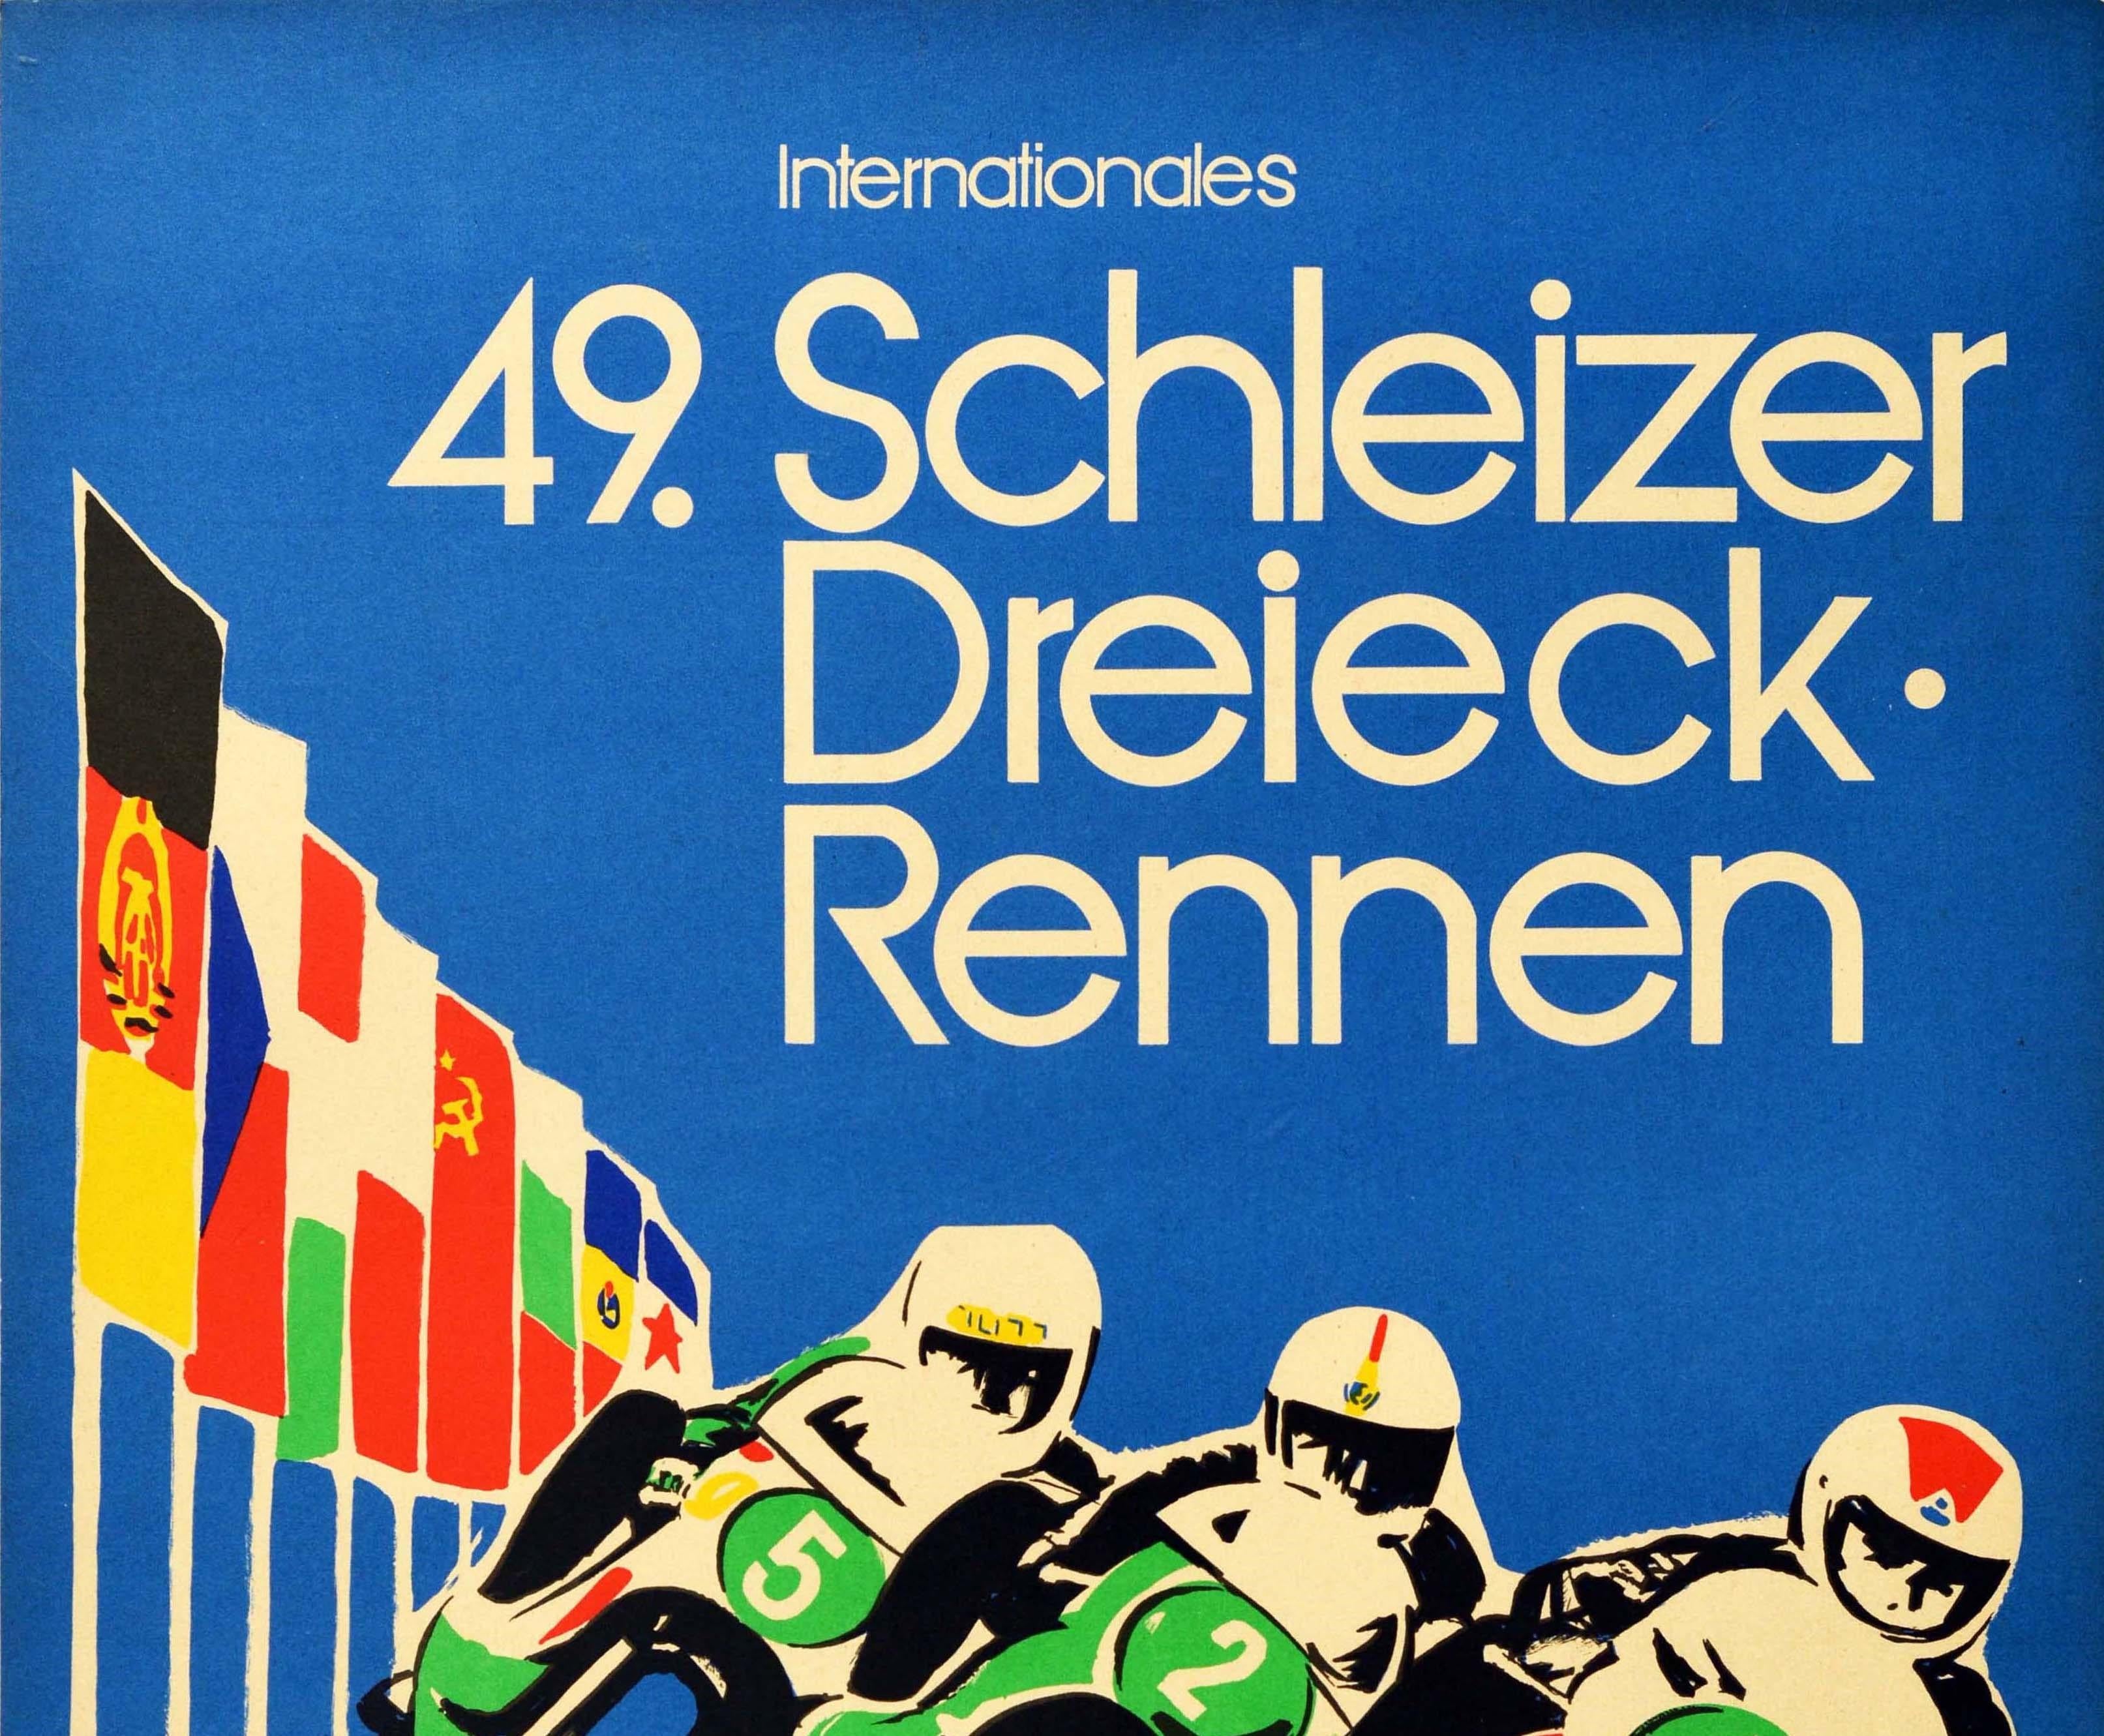 Original vintage motorsport poster for the 49th Schleizer Dreieck Rennen international road race on 6-8 August 1982 featuring a dynamic motorcycle racing image of three riders driving at speed towards the viewer on their motorbikes numbered 5, 2 and